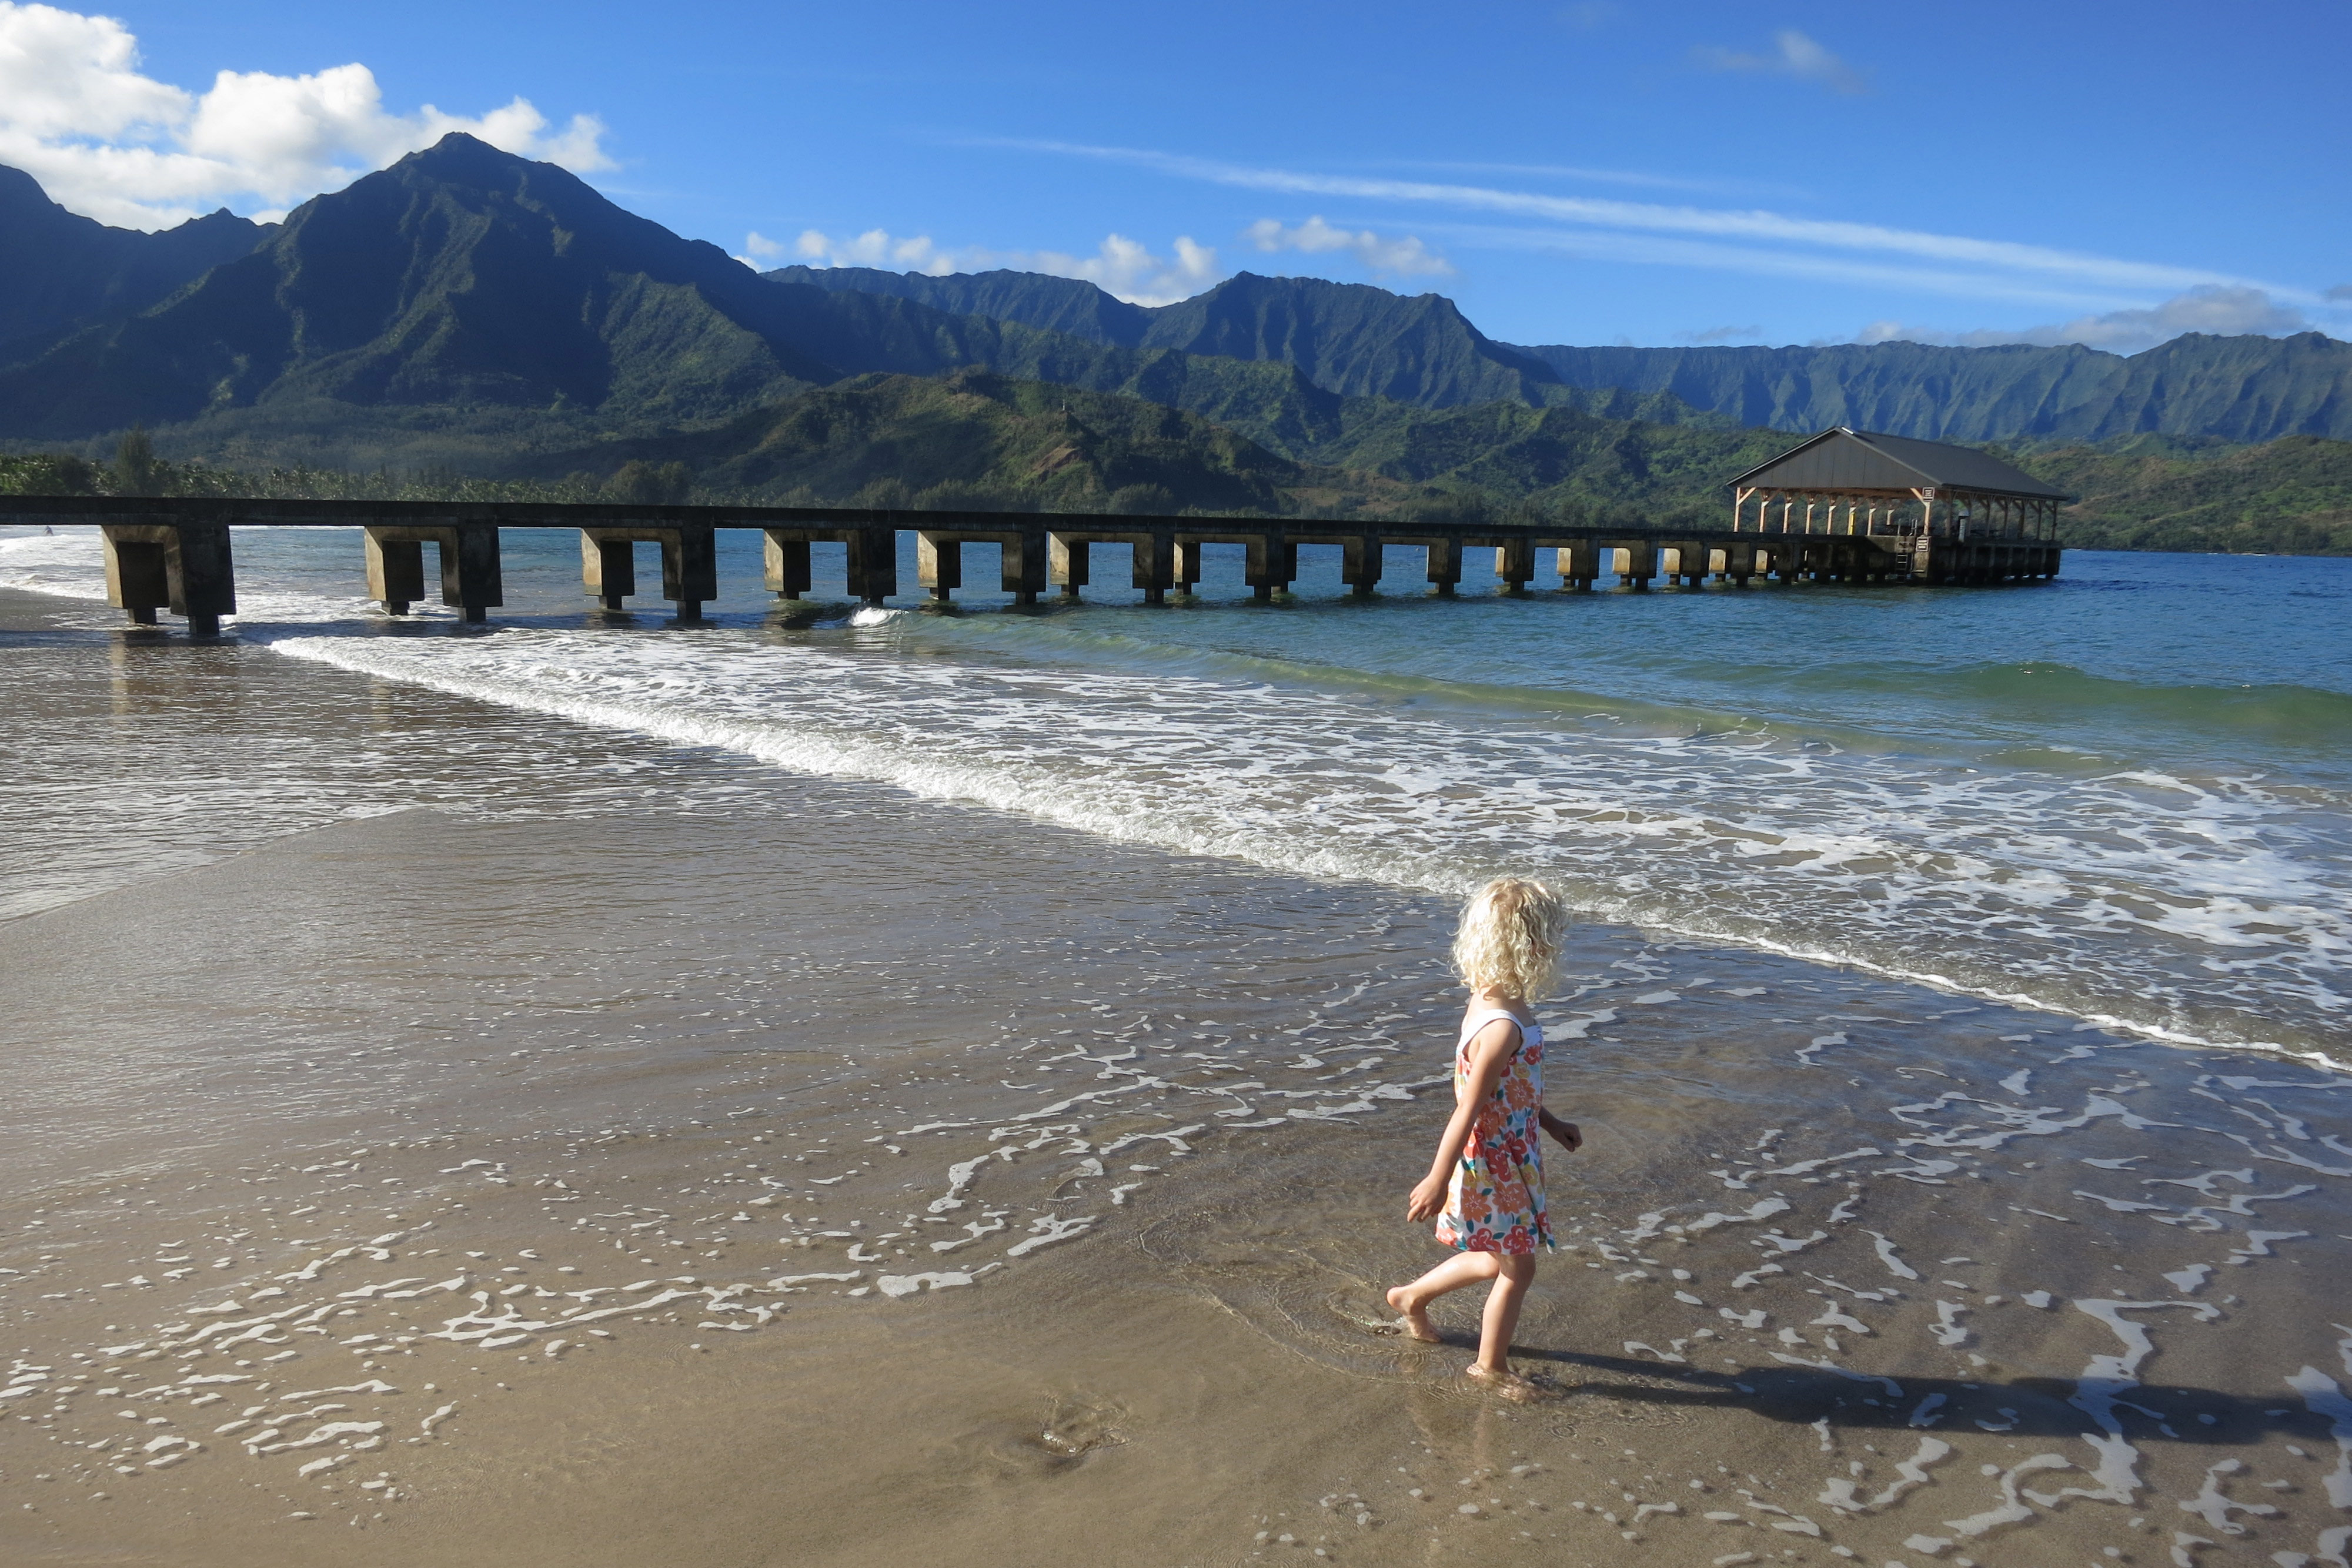 The waters near Hanalei Pier are perfect for young beachgoers. Image by Andy Murdock / Lonely Planet